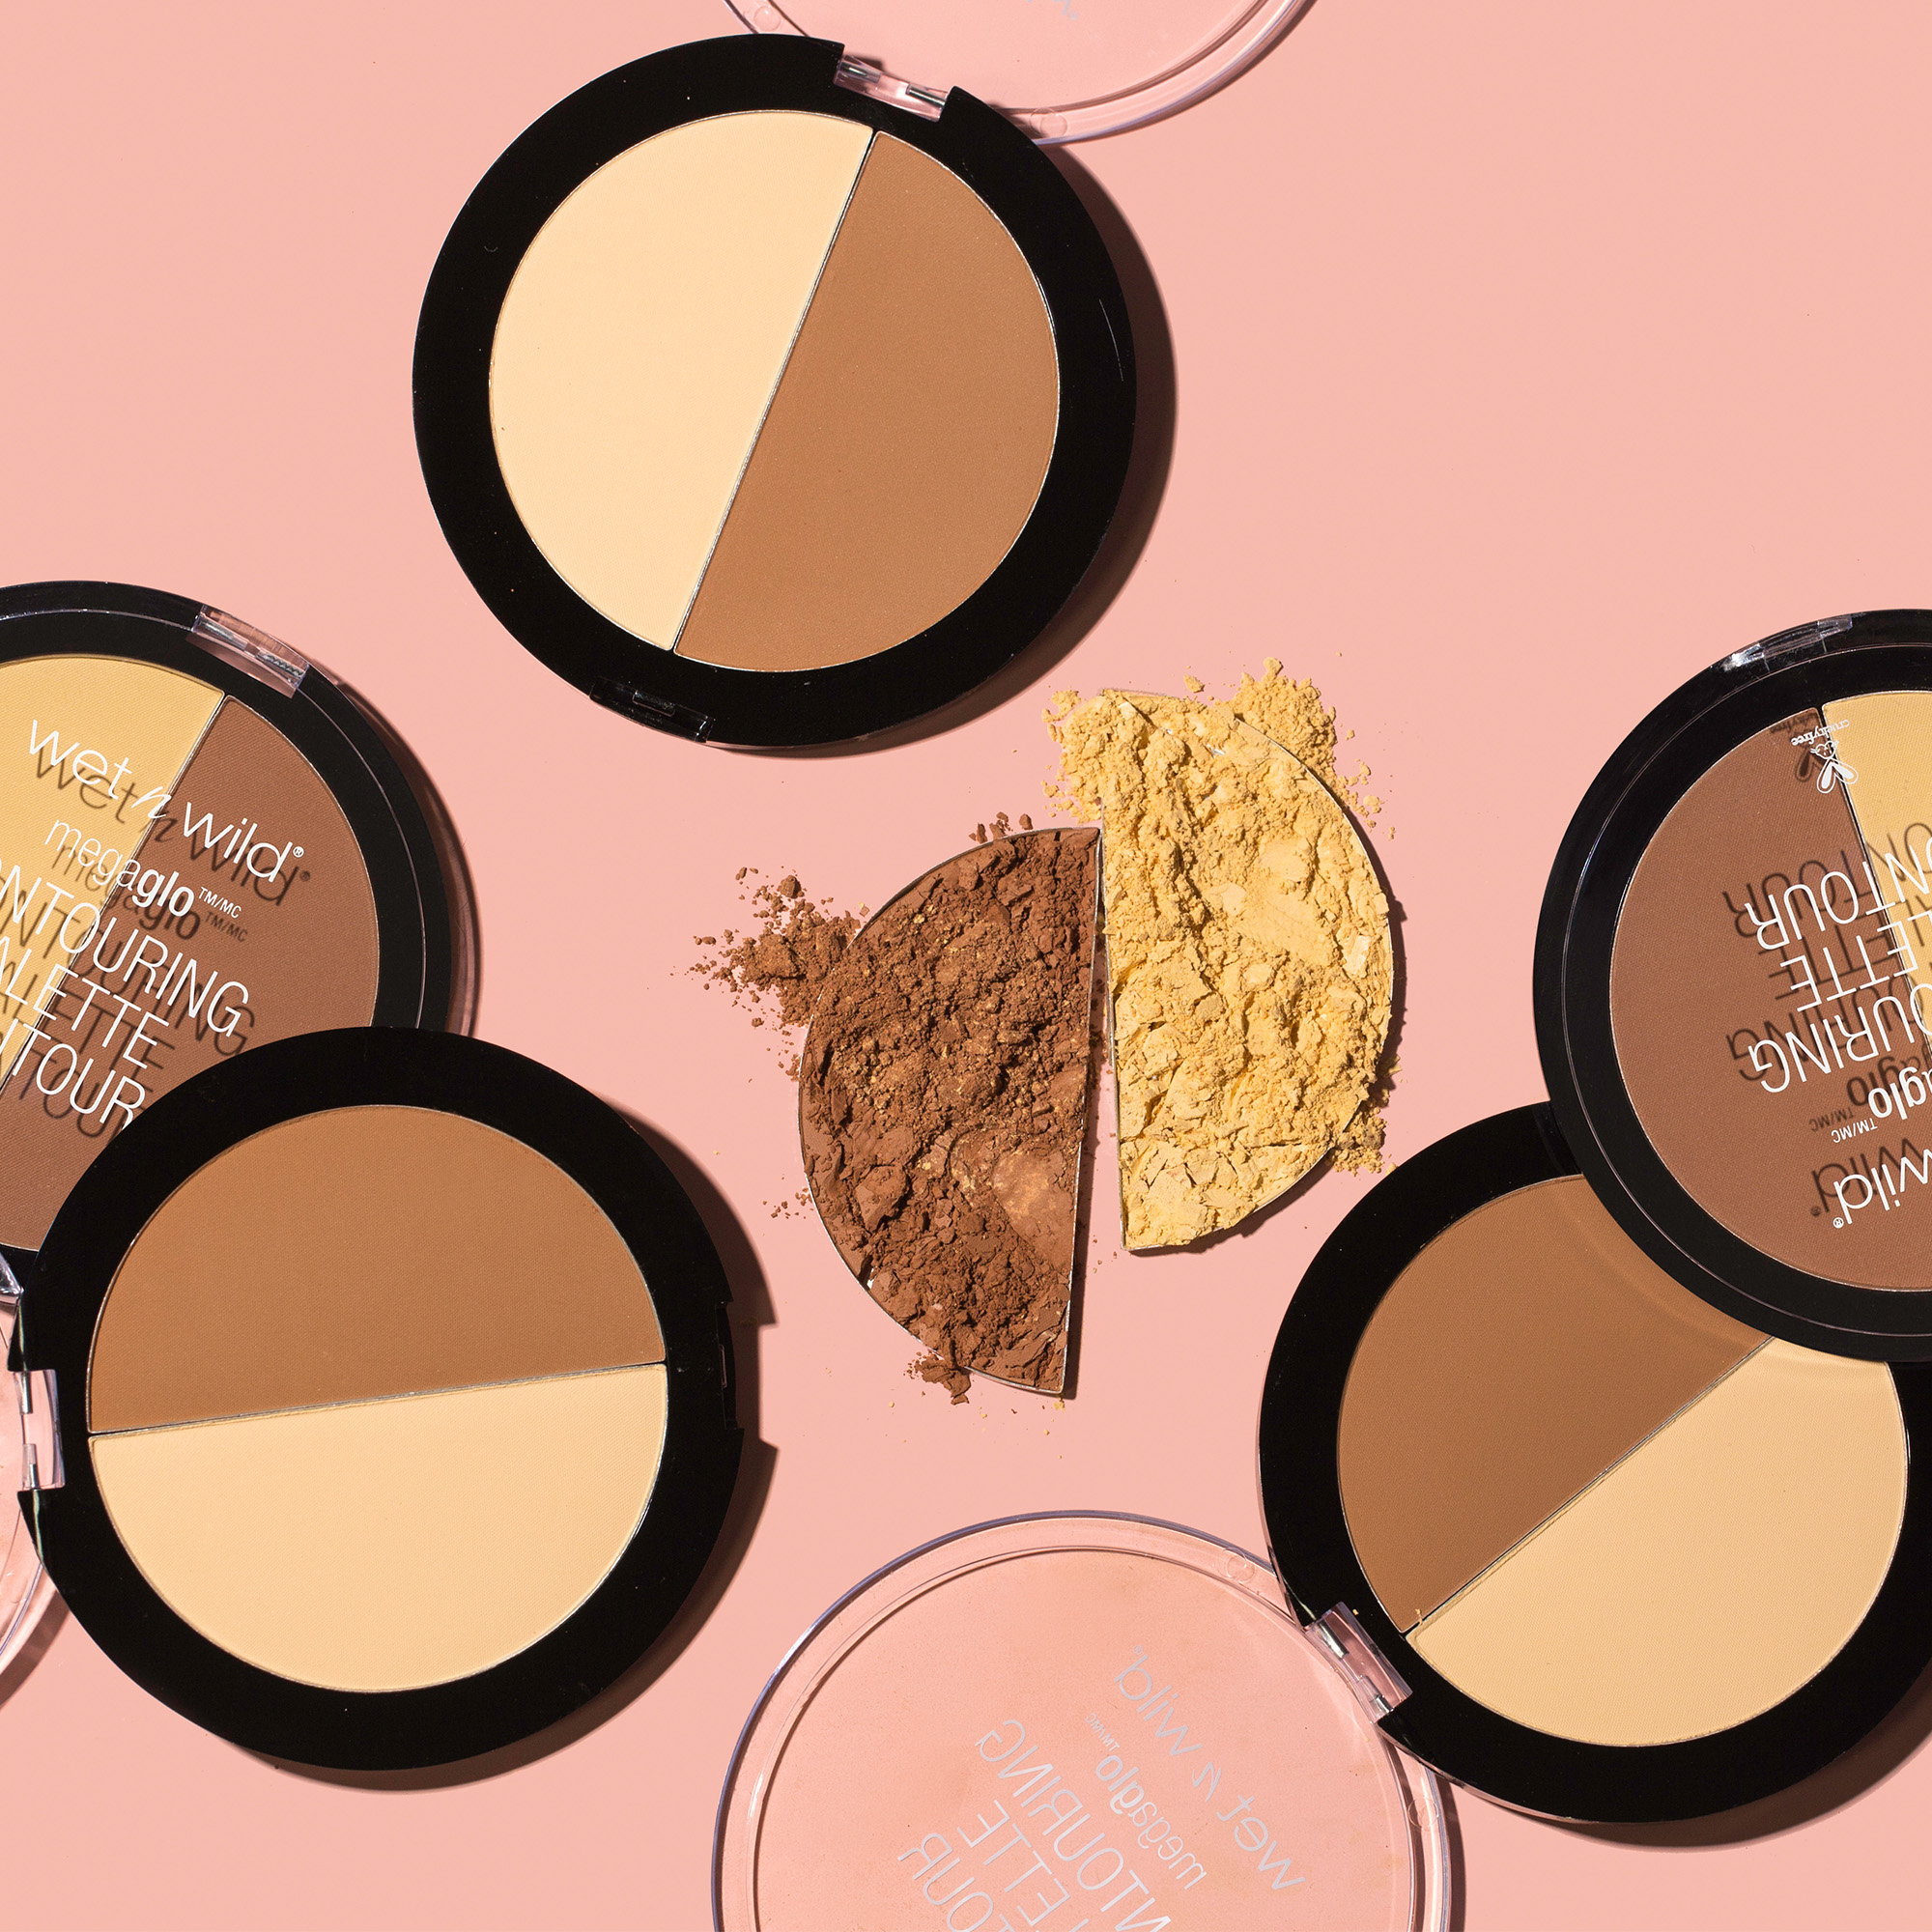 wet n wild MegaGlo Contouring Palette - Caramel Toffee - image 3 of 9